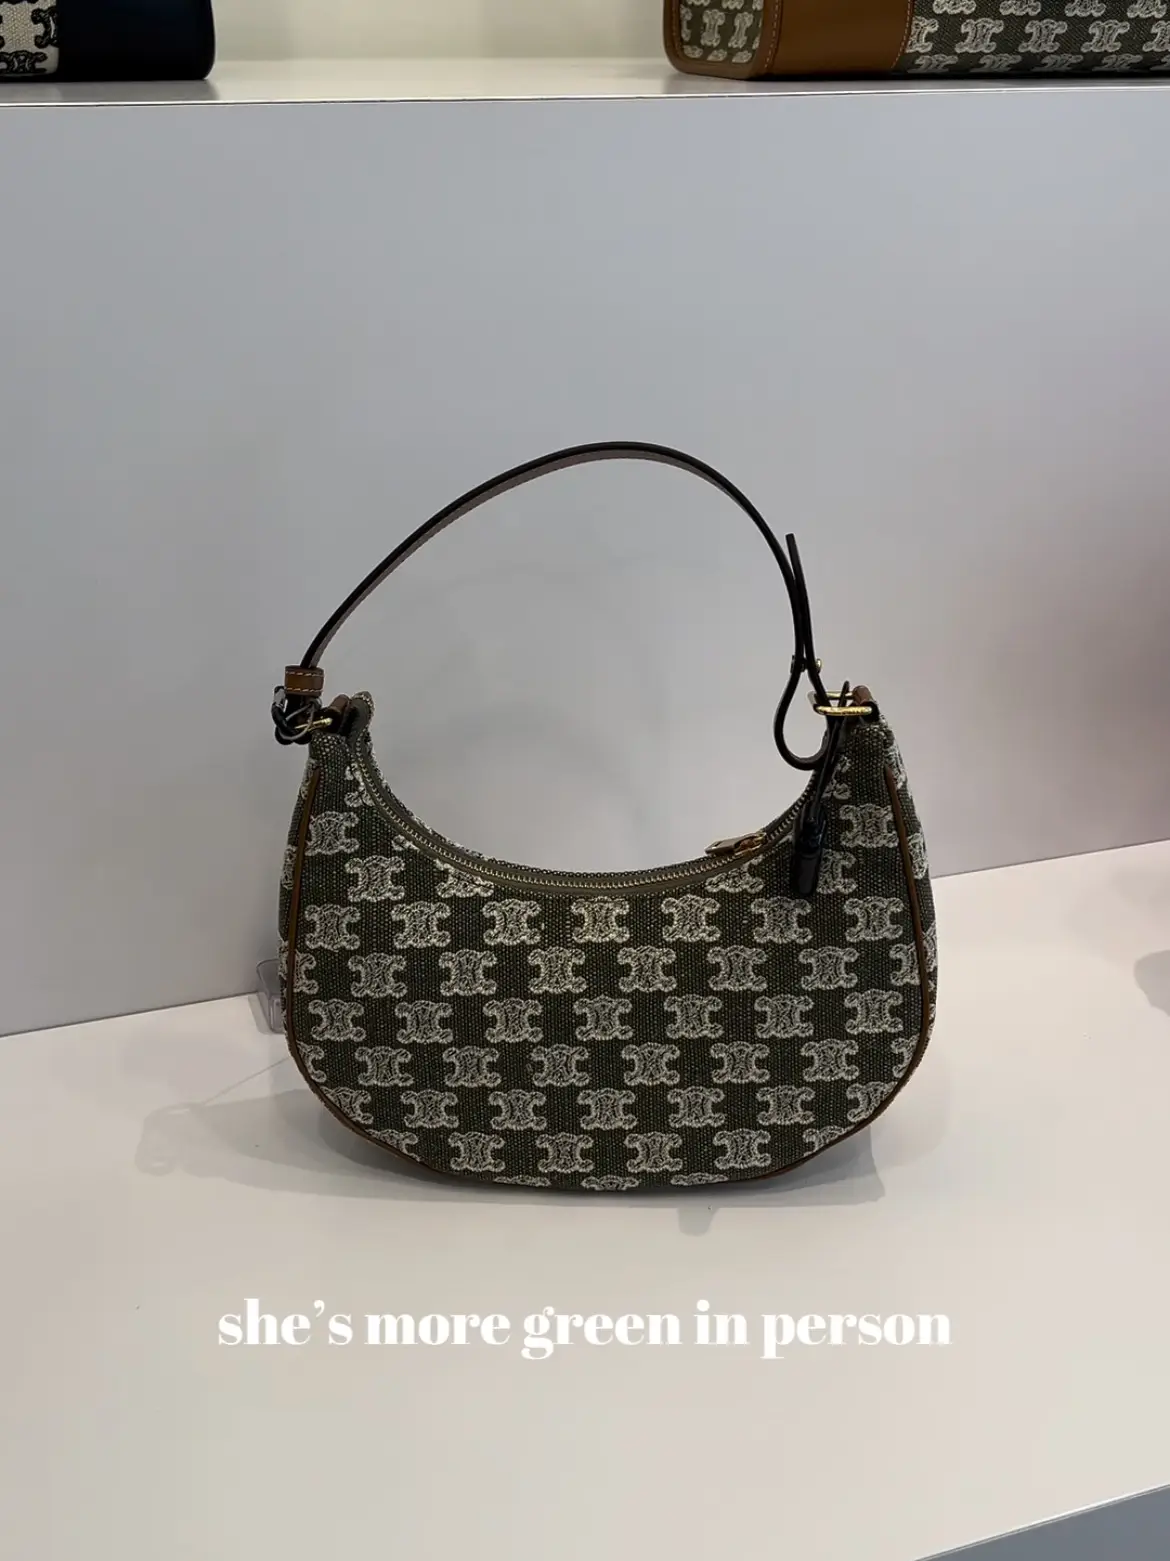 Gucci outlet woodbury commons - Lemon8 Search